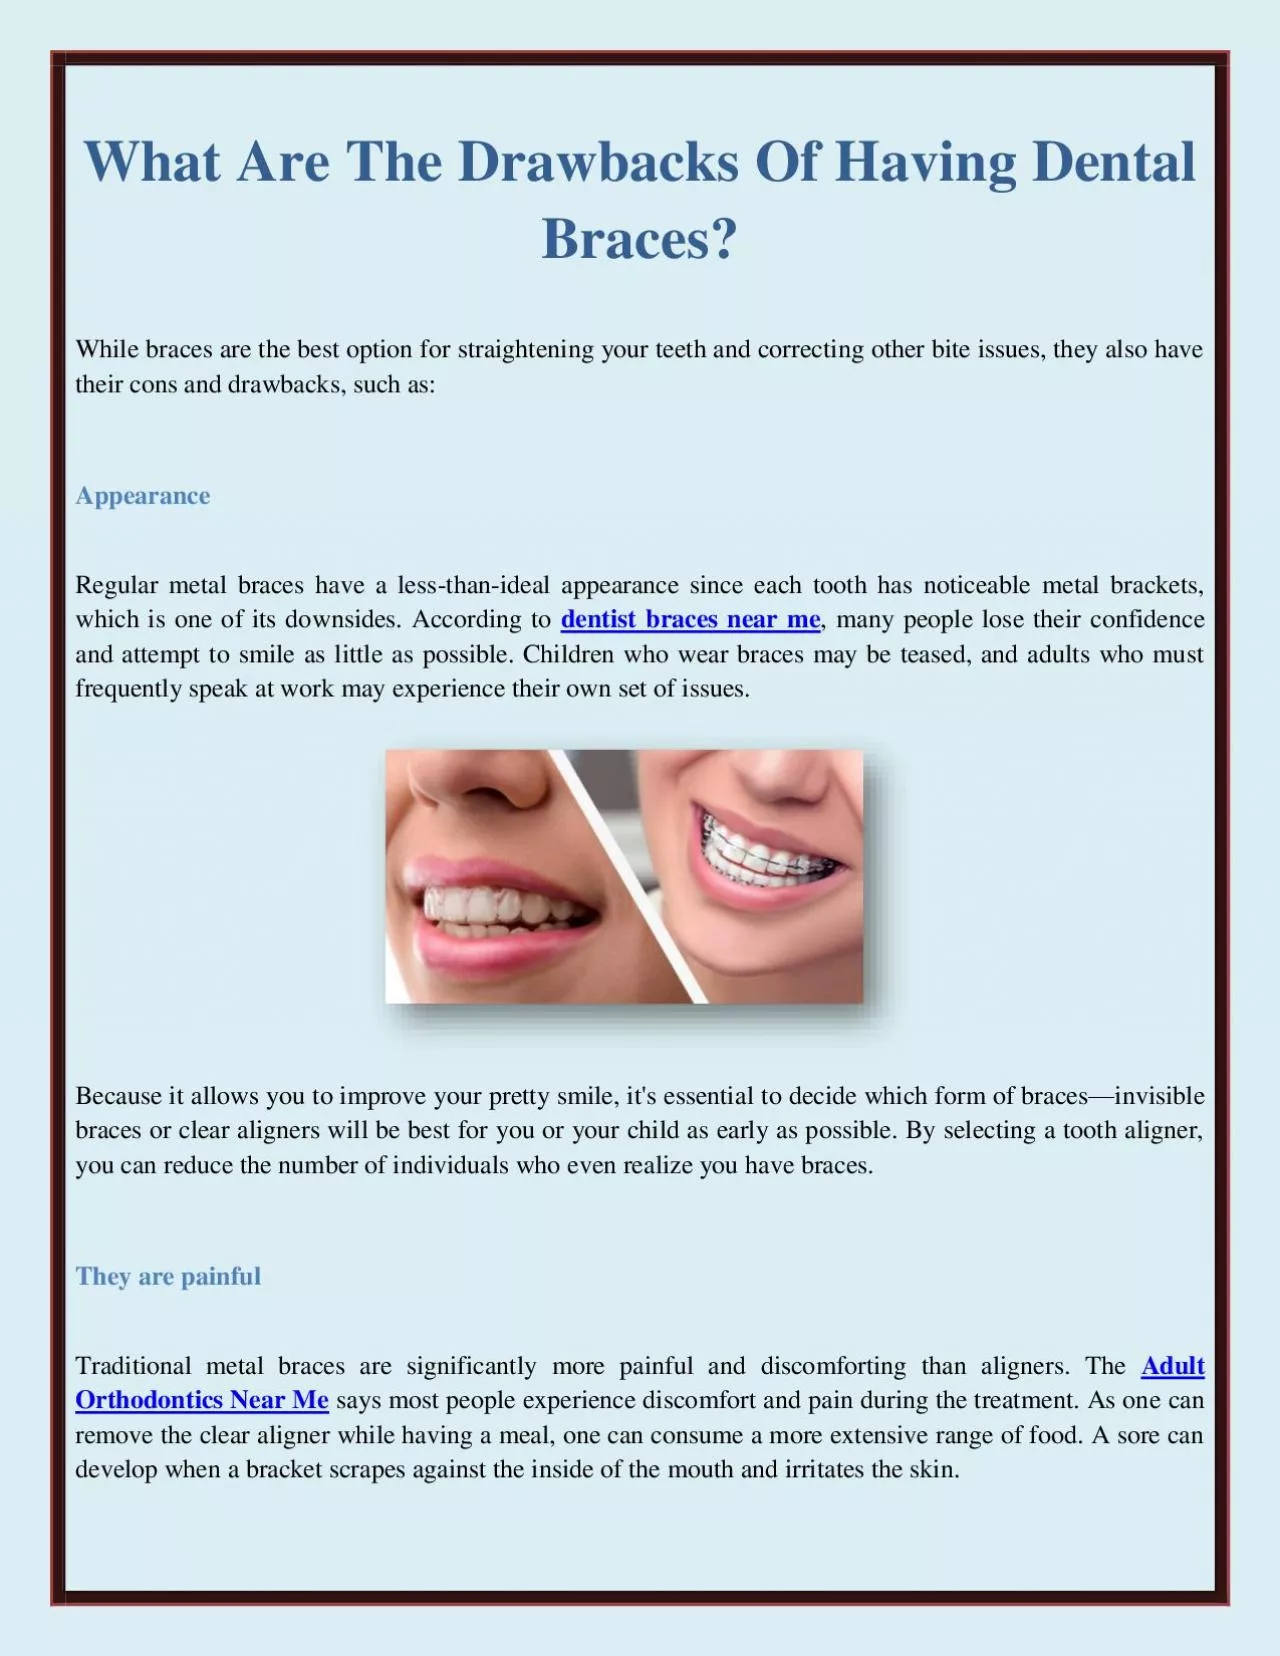 What Are The Drawbacks Of Having Dental Braces?